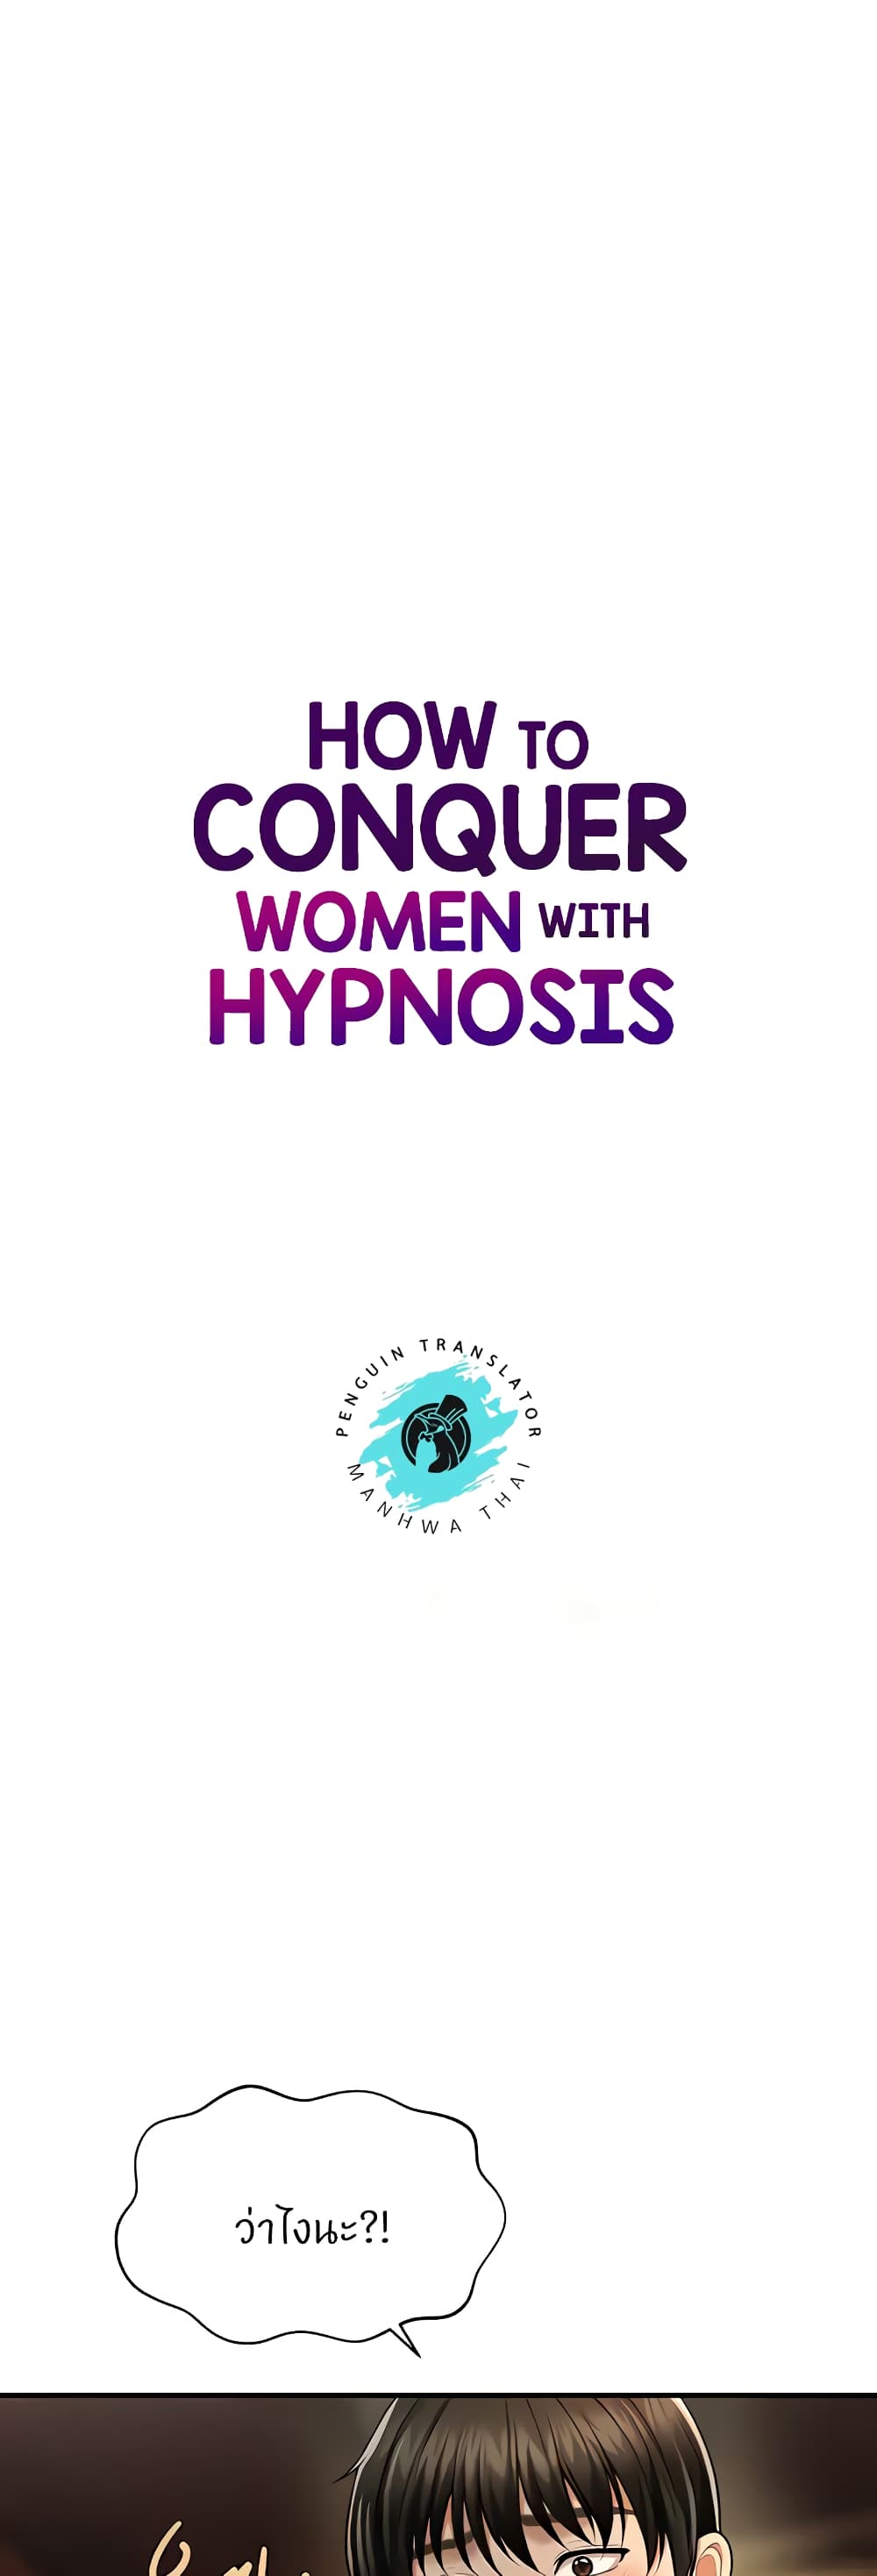 How to Conquer Women with Hypnosis 7-7